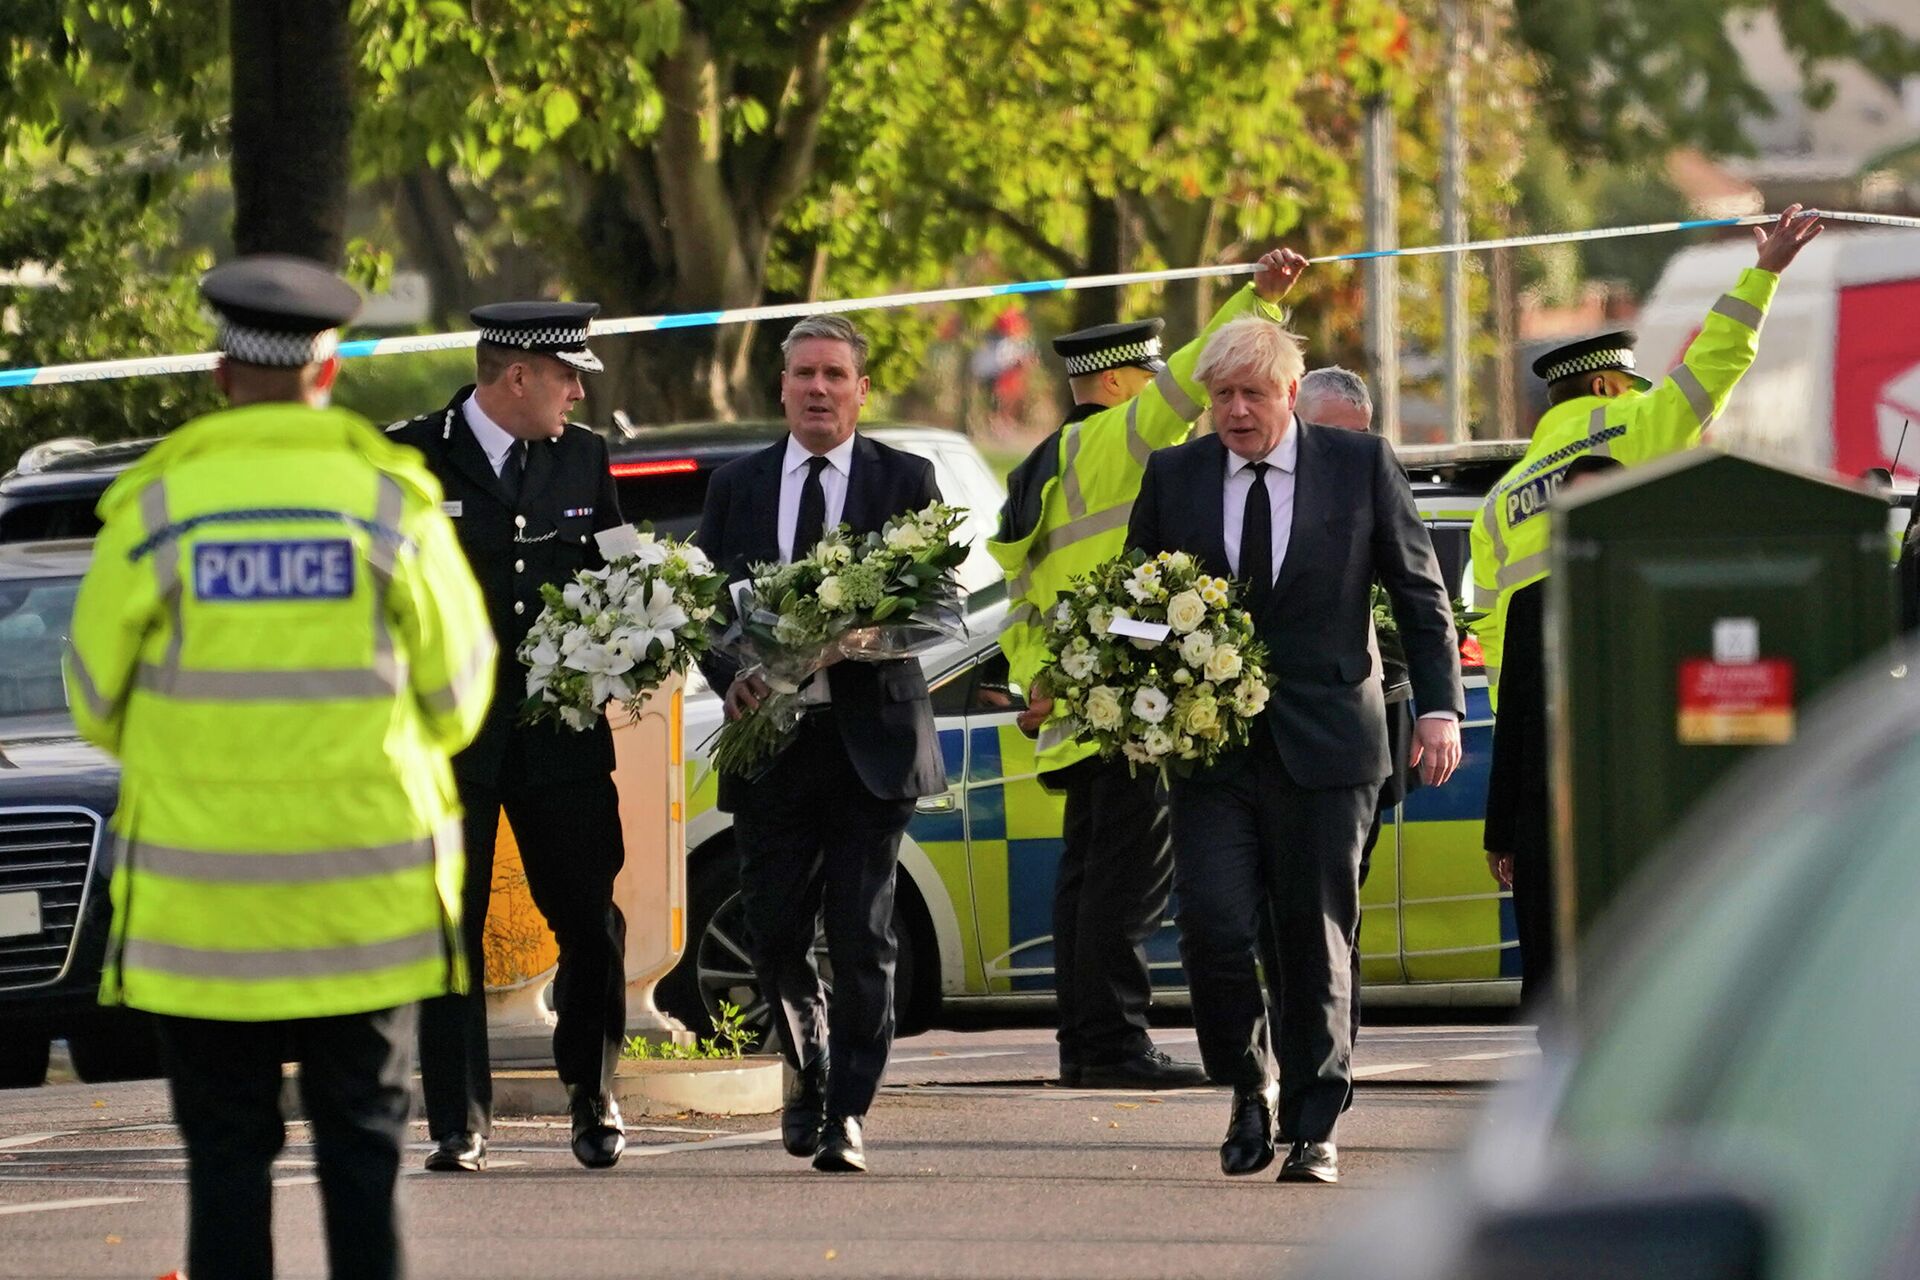 British Prime Minister Boris Johnson, right, and Leader of the Labour Party Sir Keir Starmer, second from right, carry flowers as they arrive at the scene where a member of Parliament was stabbed Friday, in Leigh-on-Sea, Essex, England, Saturday, Oct. 16, 2021 - Sputnik International, 1920, 20.10.2021